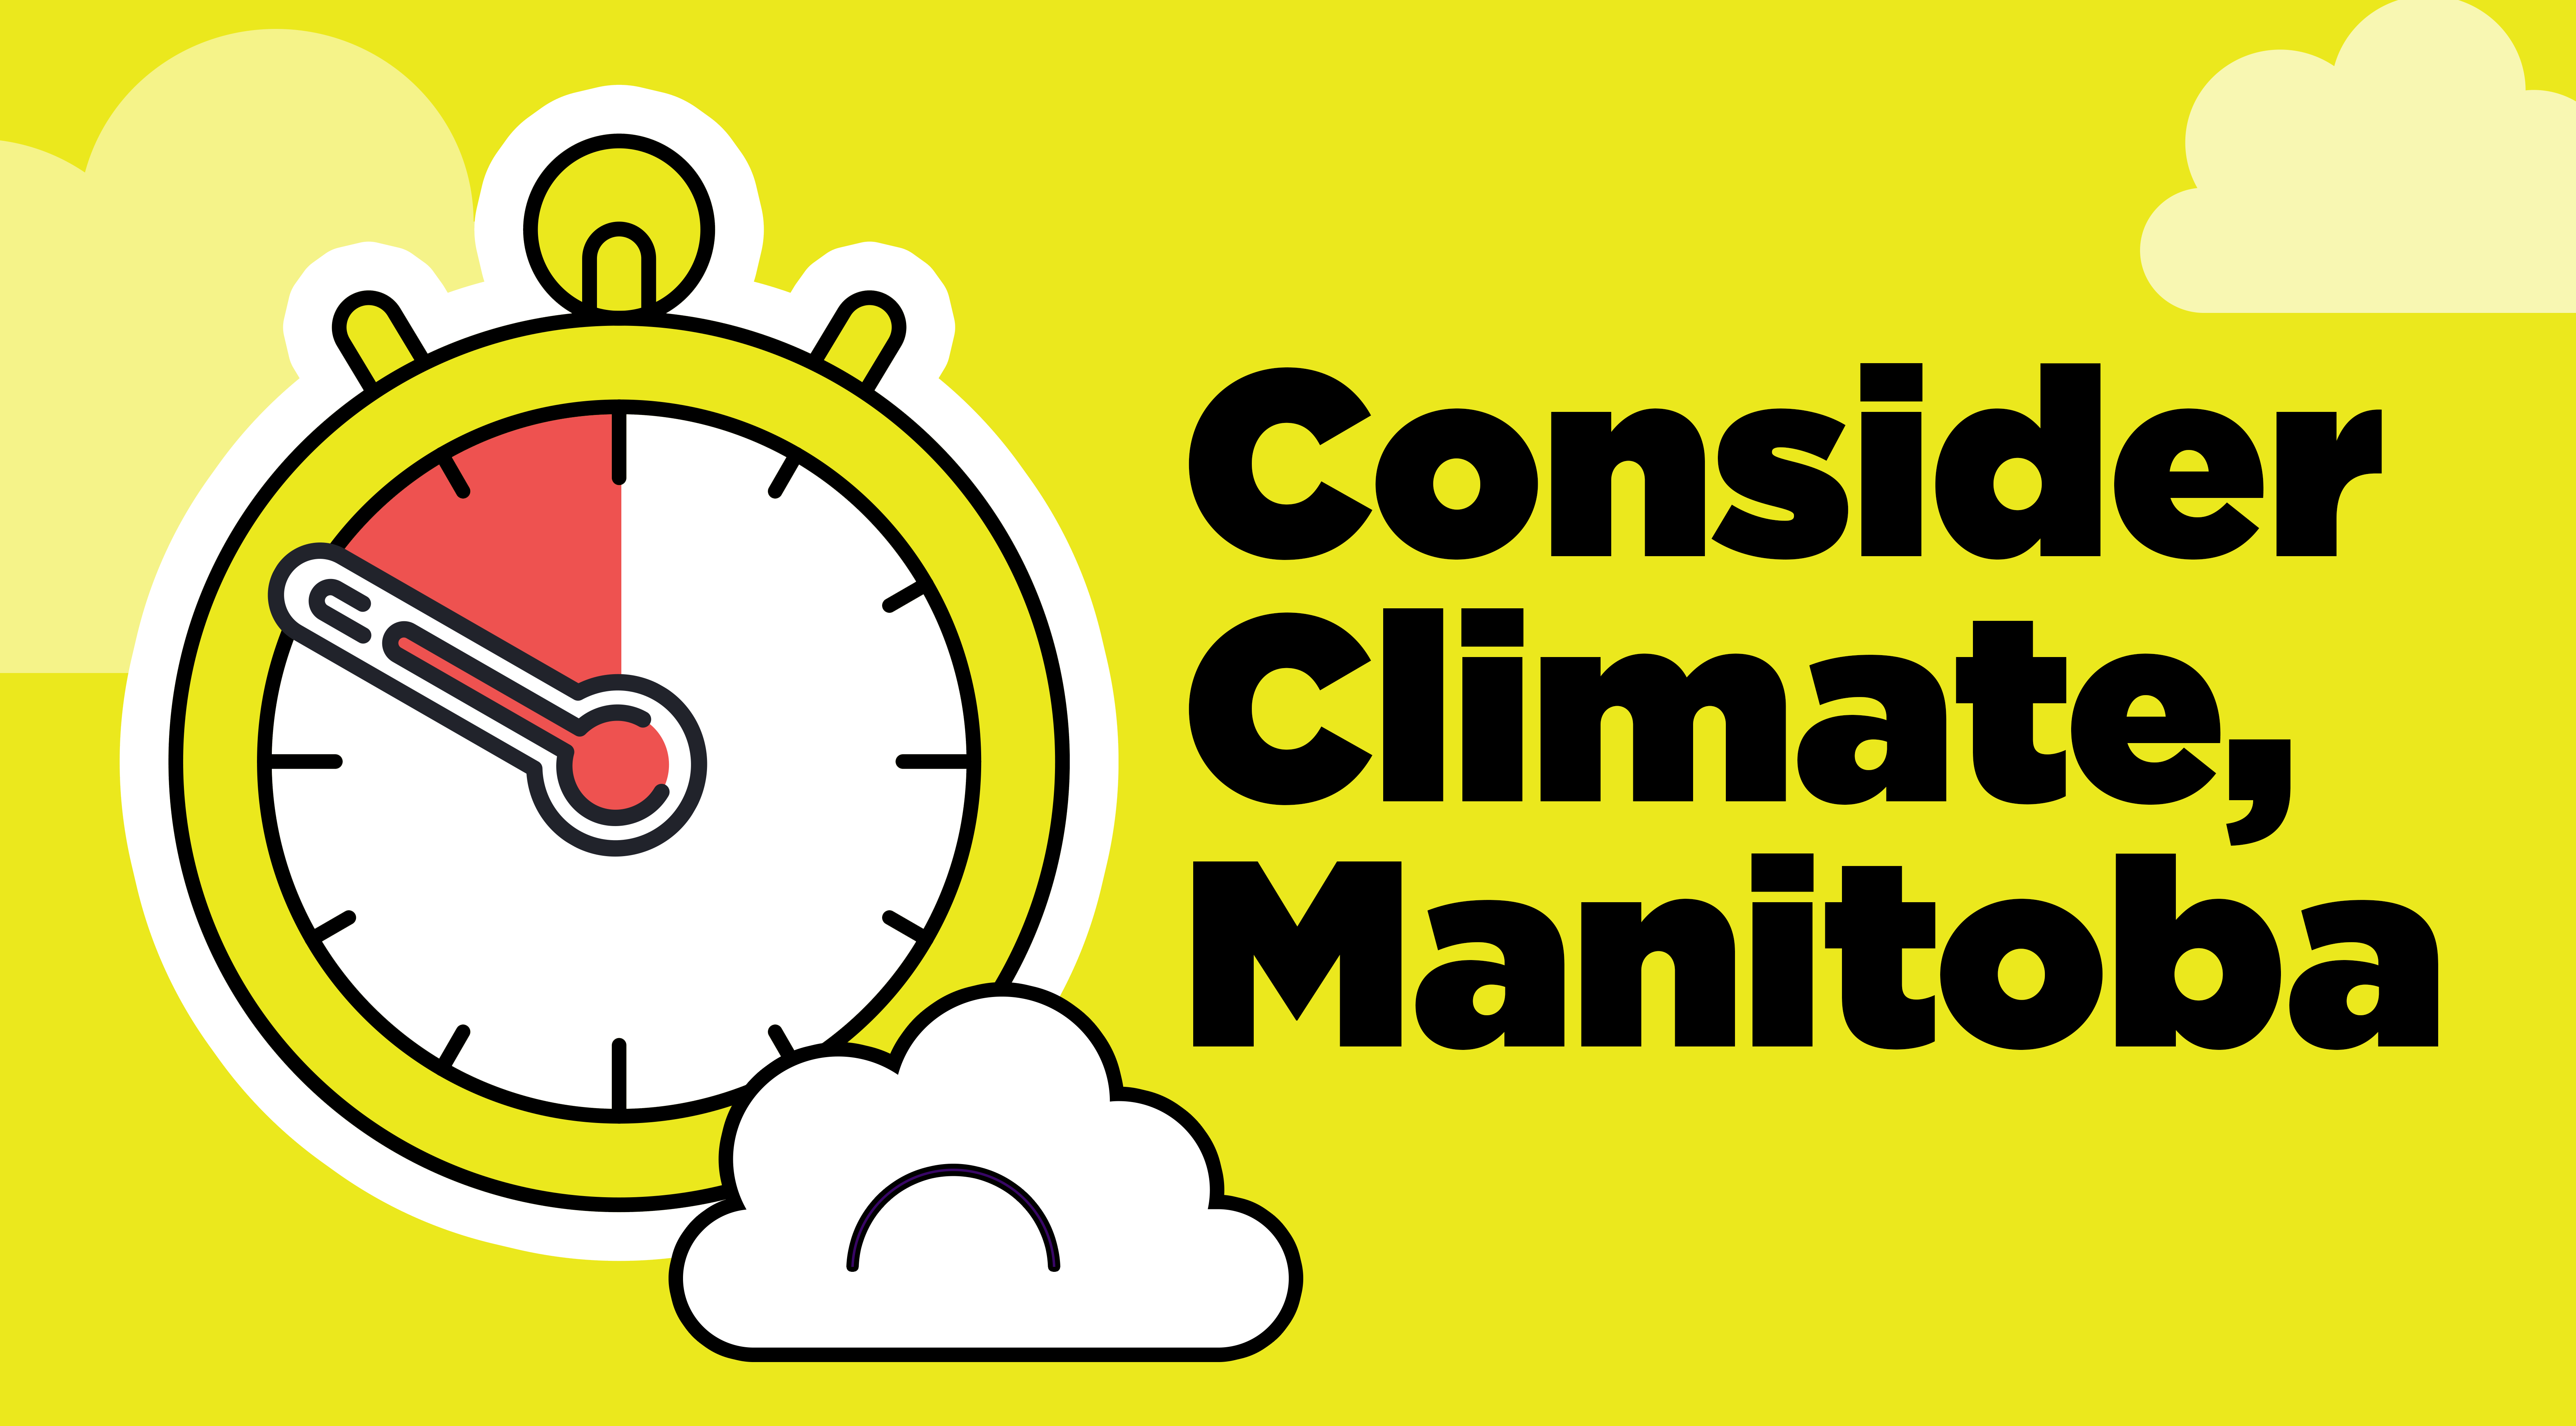 75% of Manitobans want our government to Consider Climate